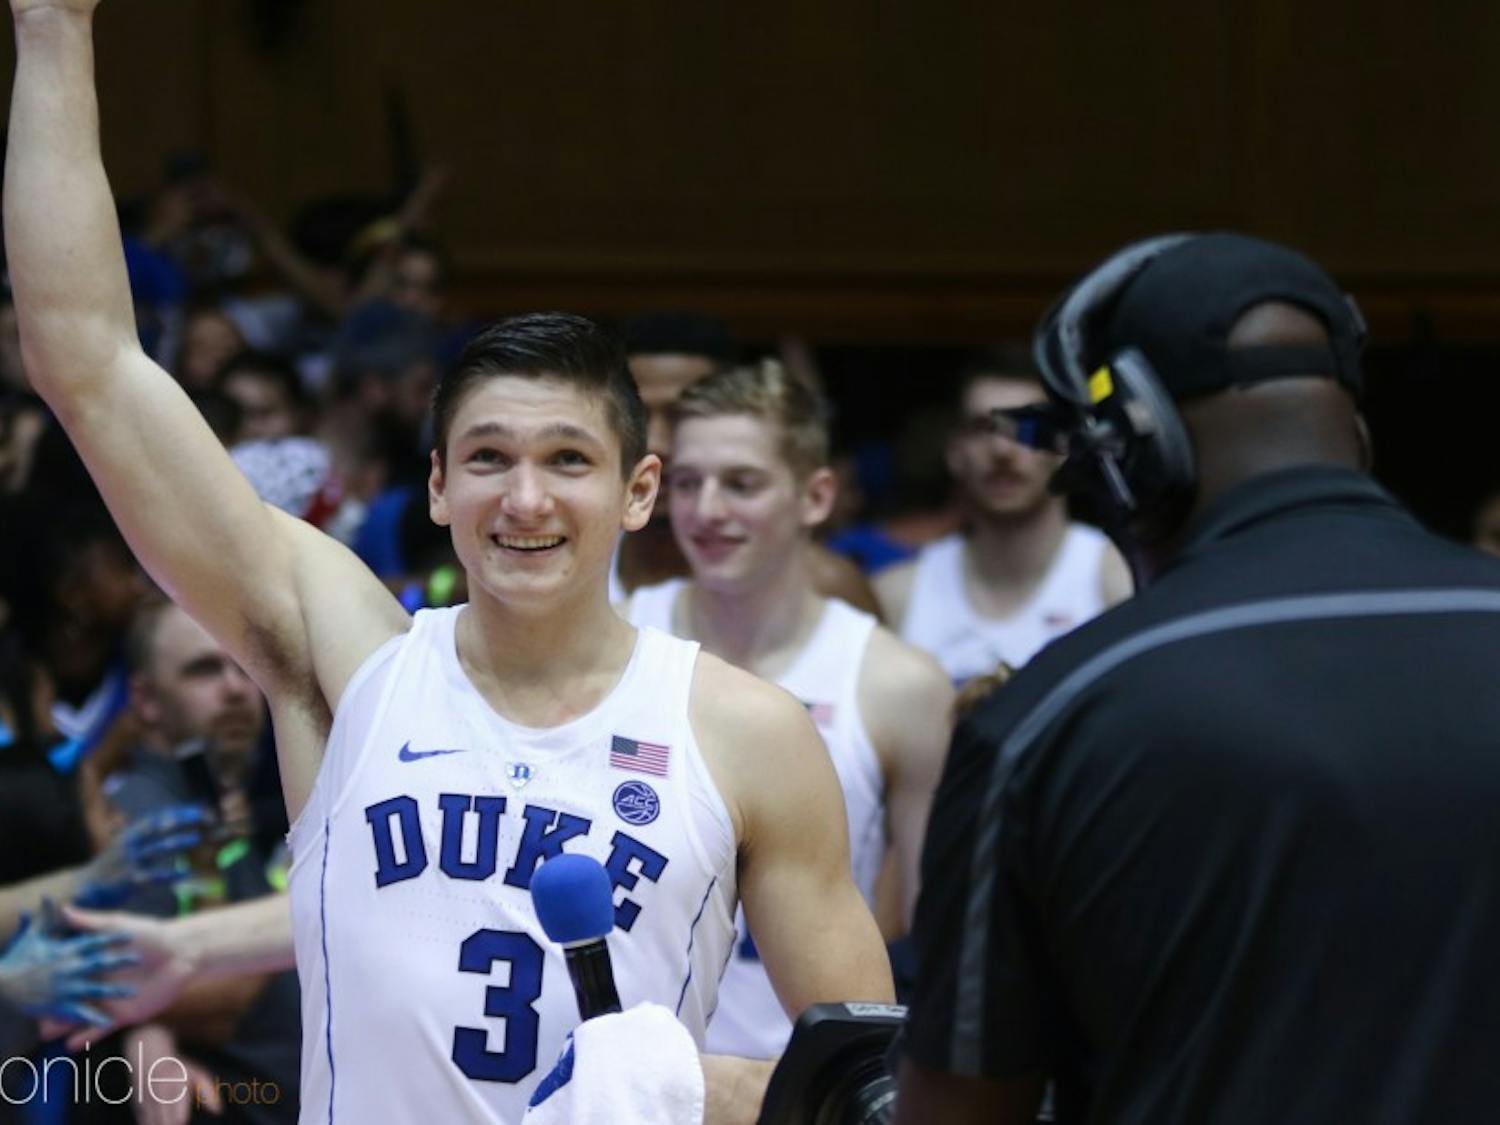 Grayson Allen has quietly emerged as a key contributor for defending NBA champions, the Milwaukee Bucks.